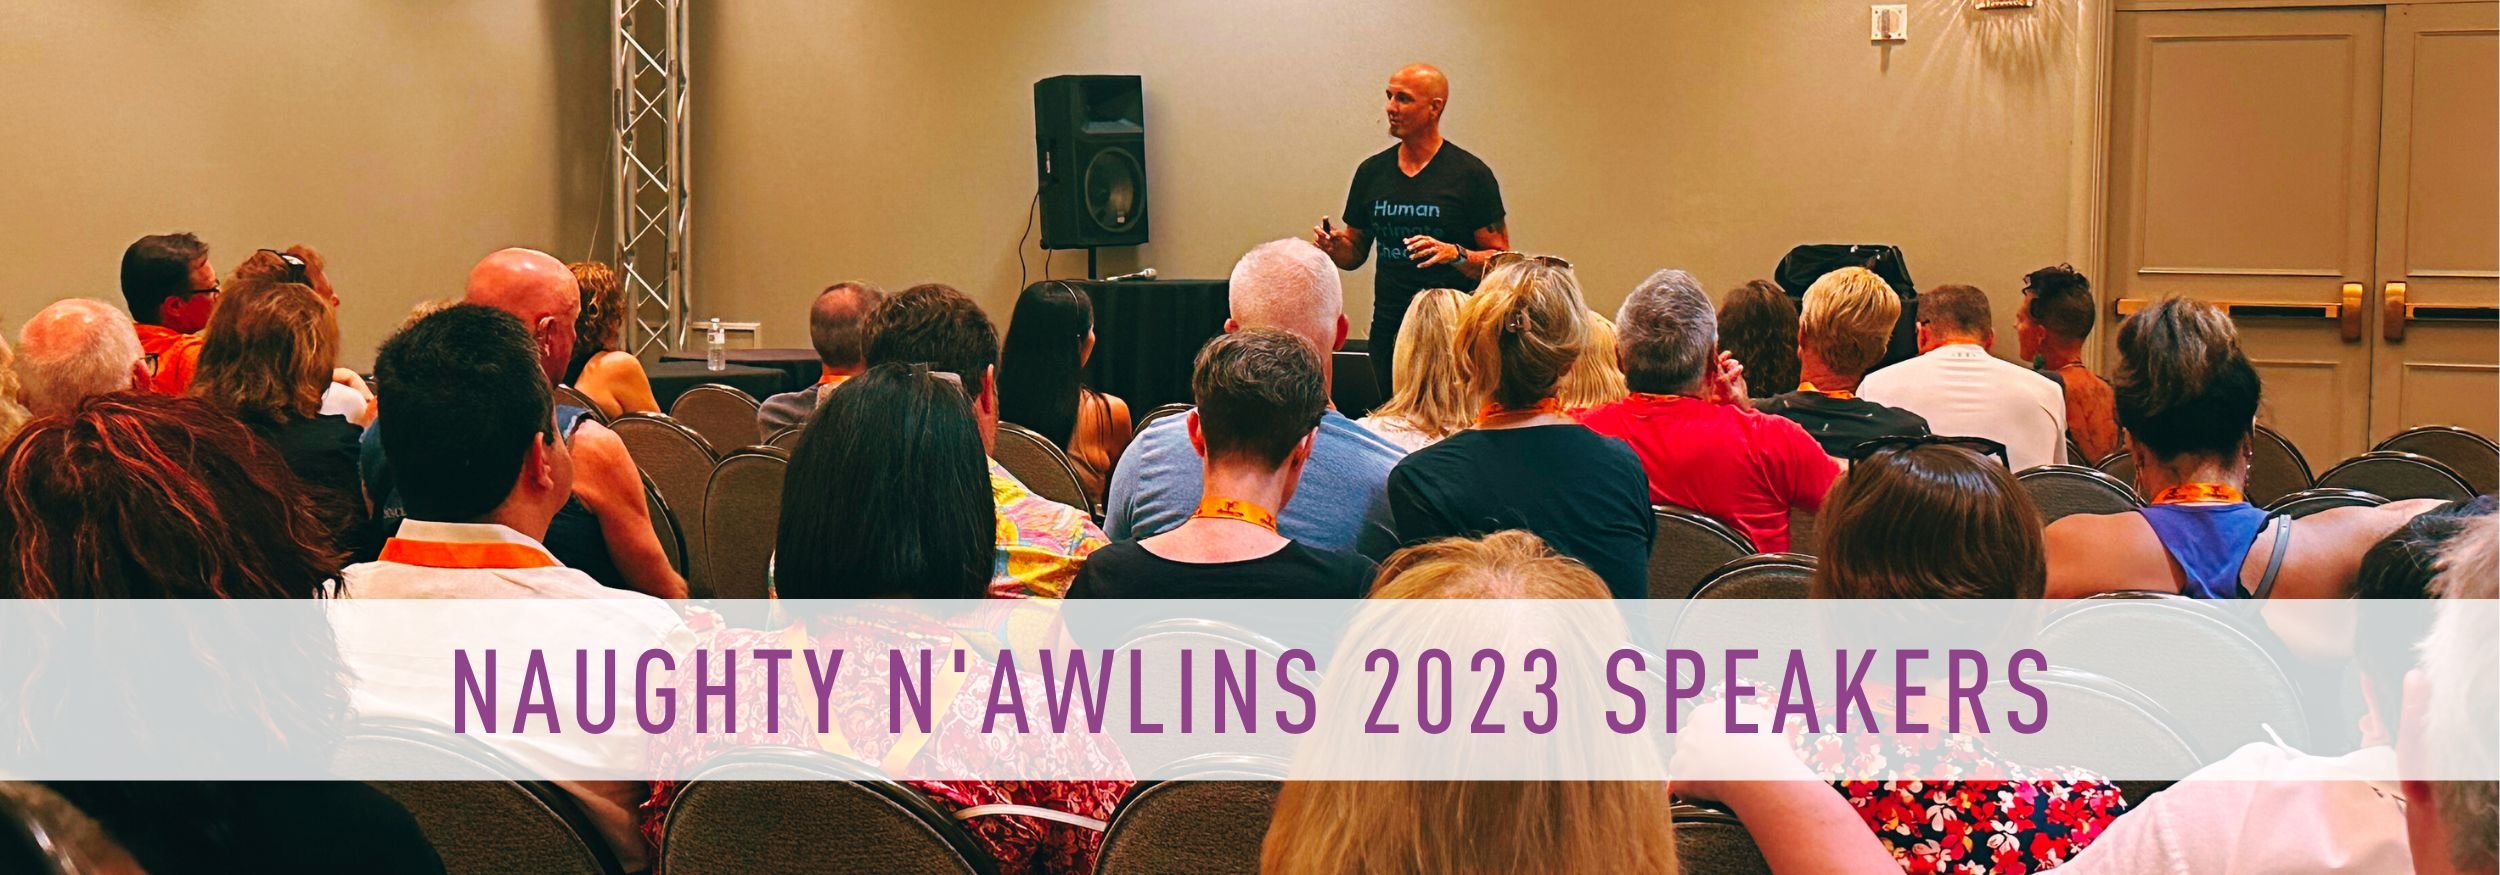 Naughty Nawlins 2023 Speakers — NAUGHTY EVENTS